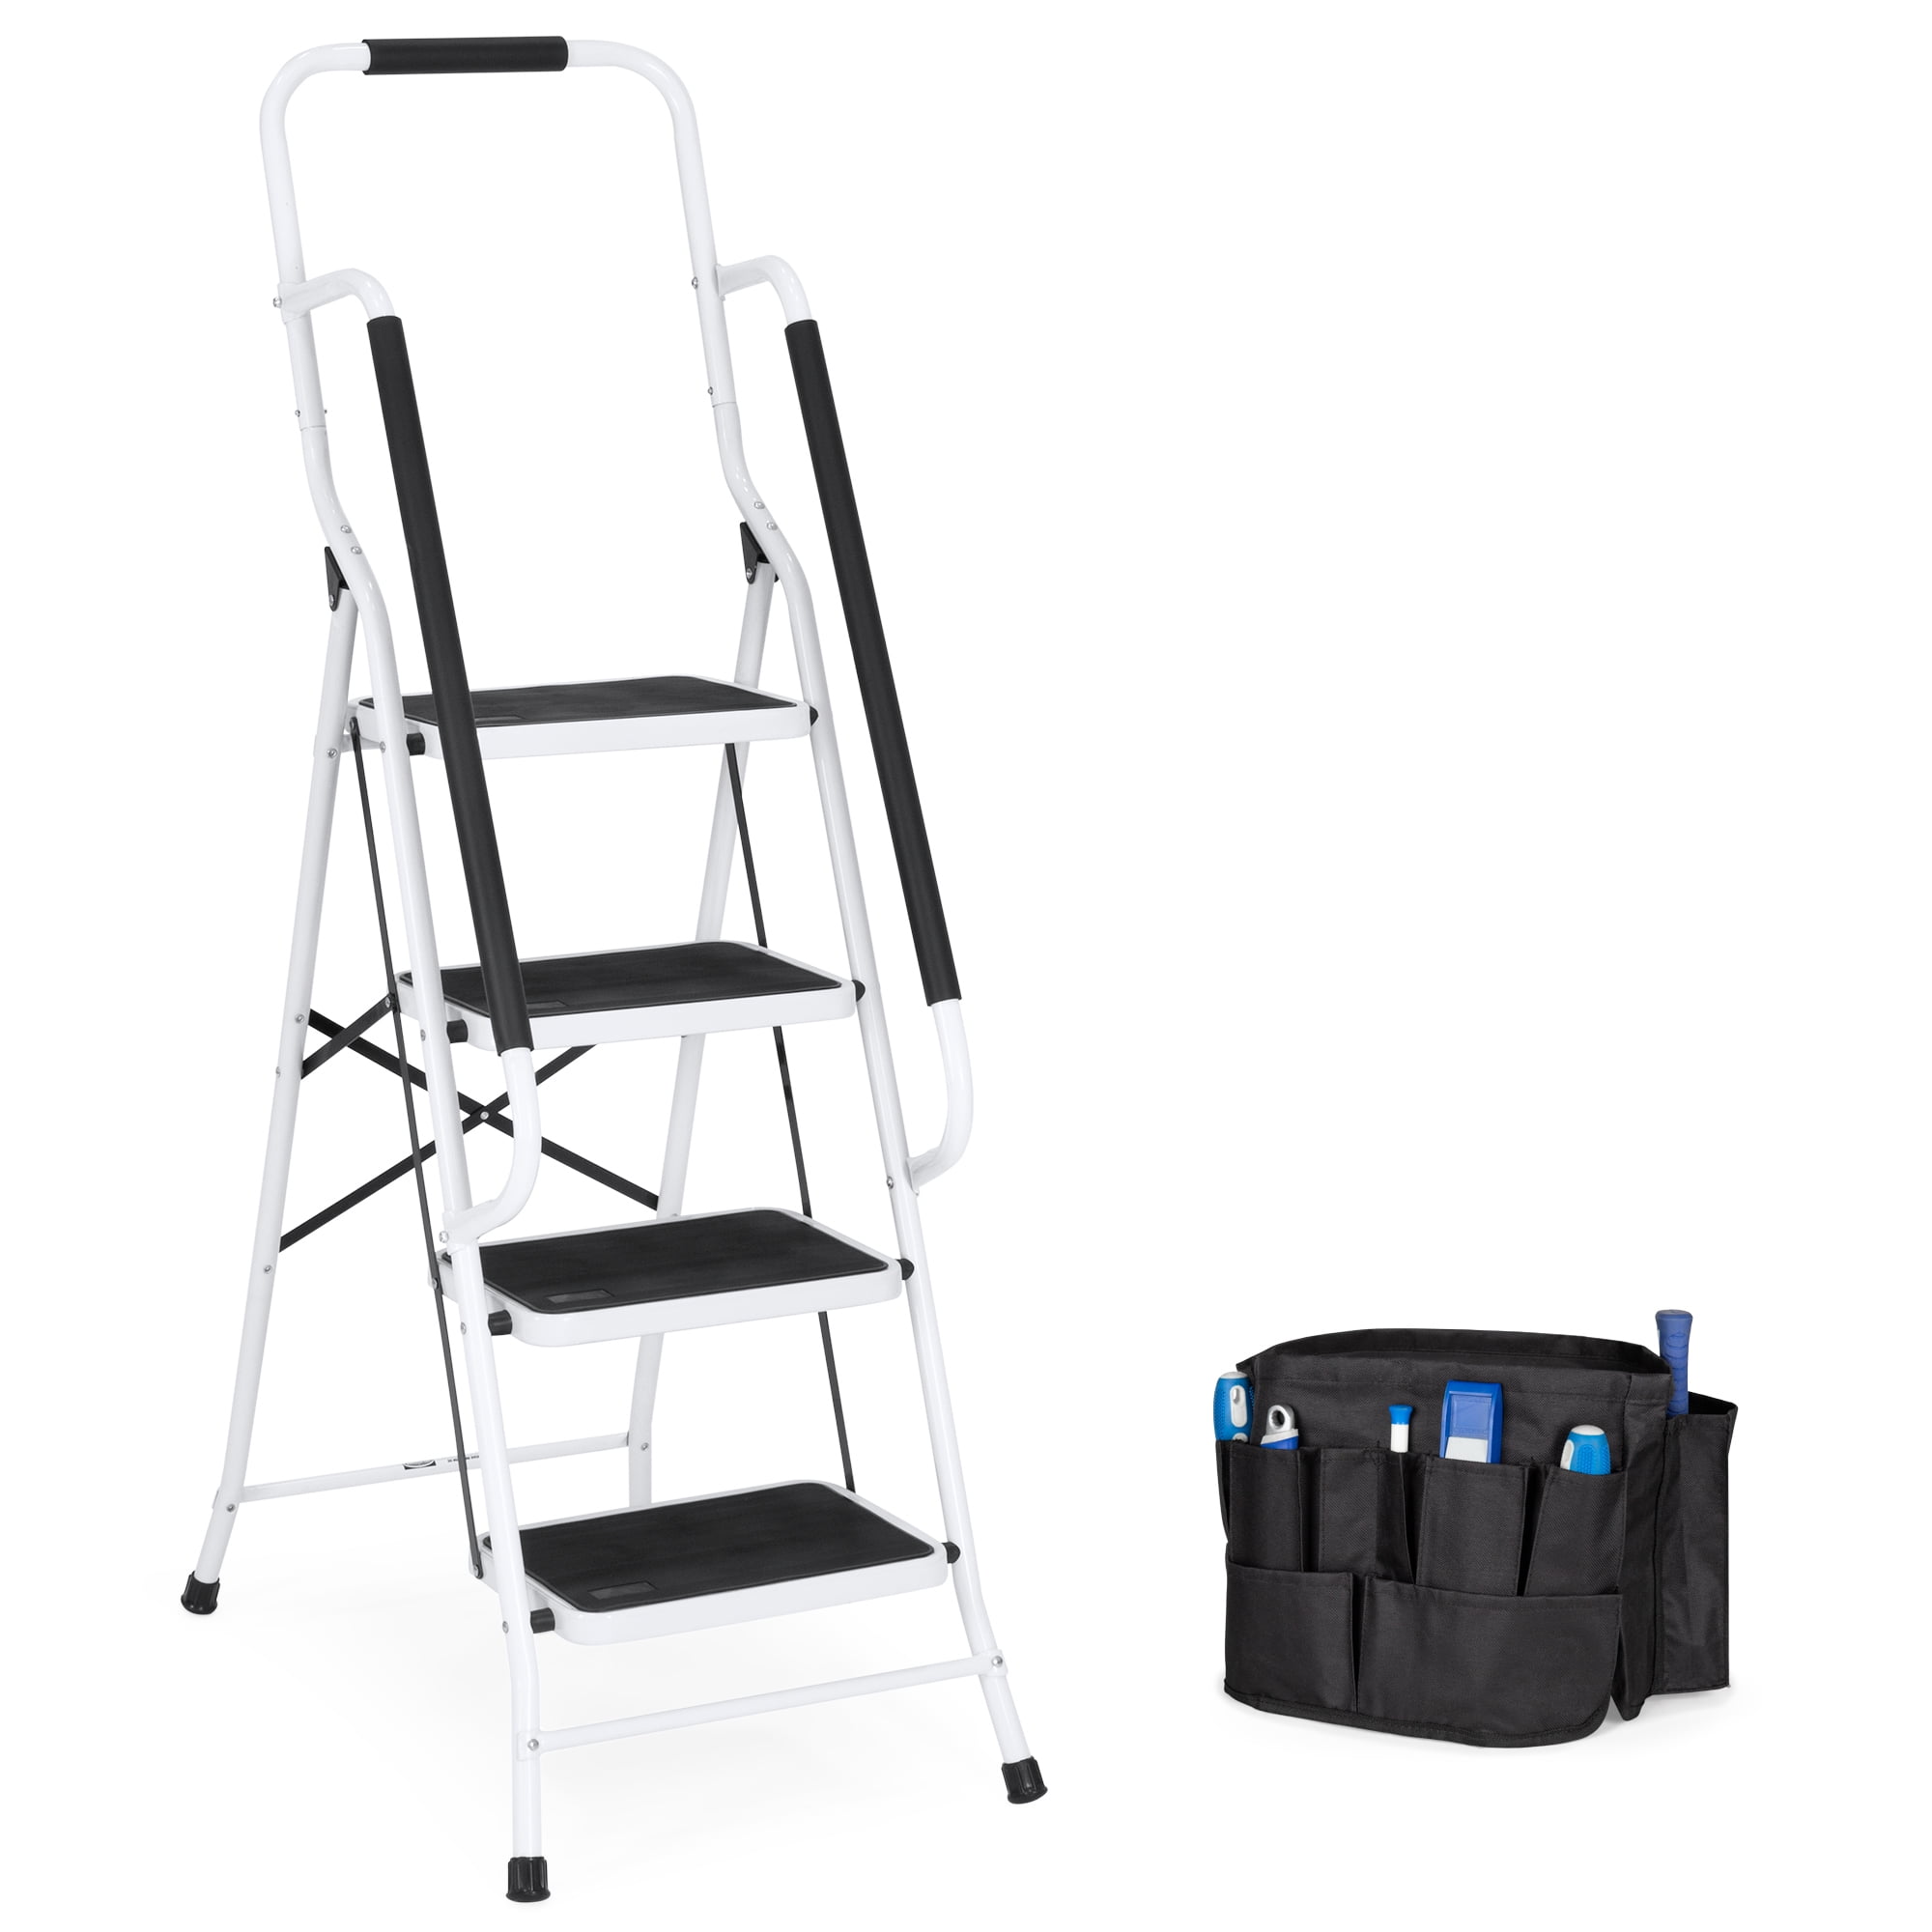 4 Step Ladder Folding Portable with Anti-Slip Rubber Mat Safety Handrail 150kg/330lbs Load Heavy Duty Steel 